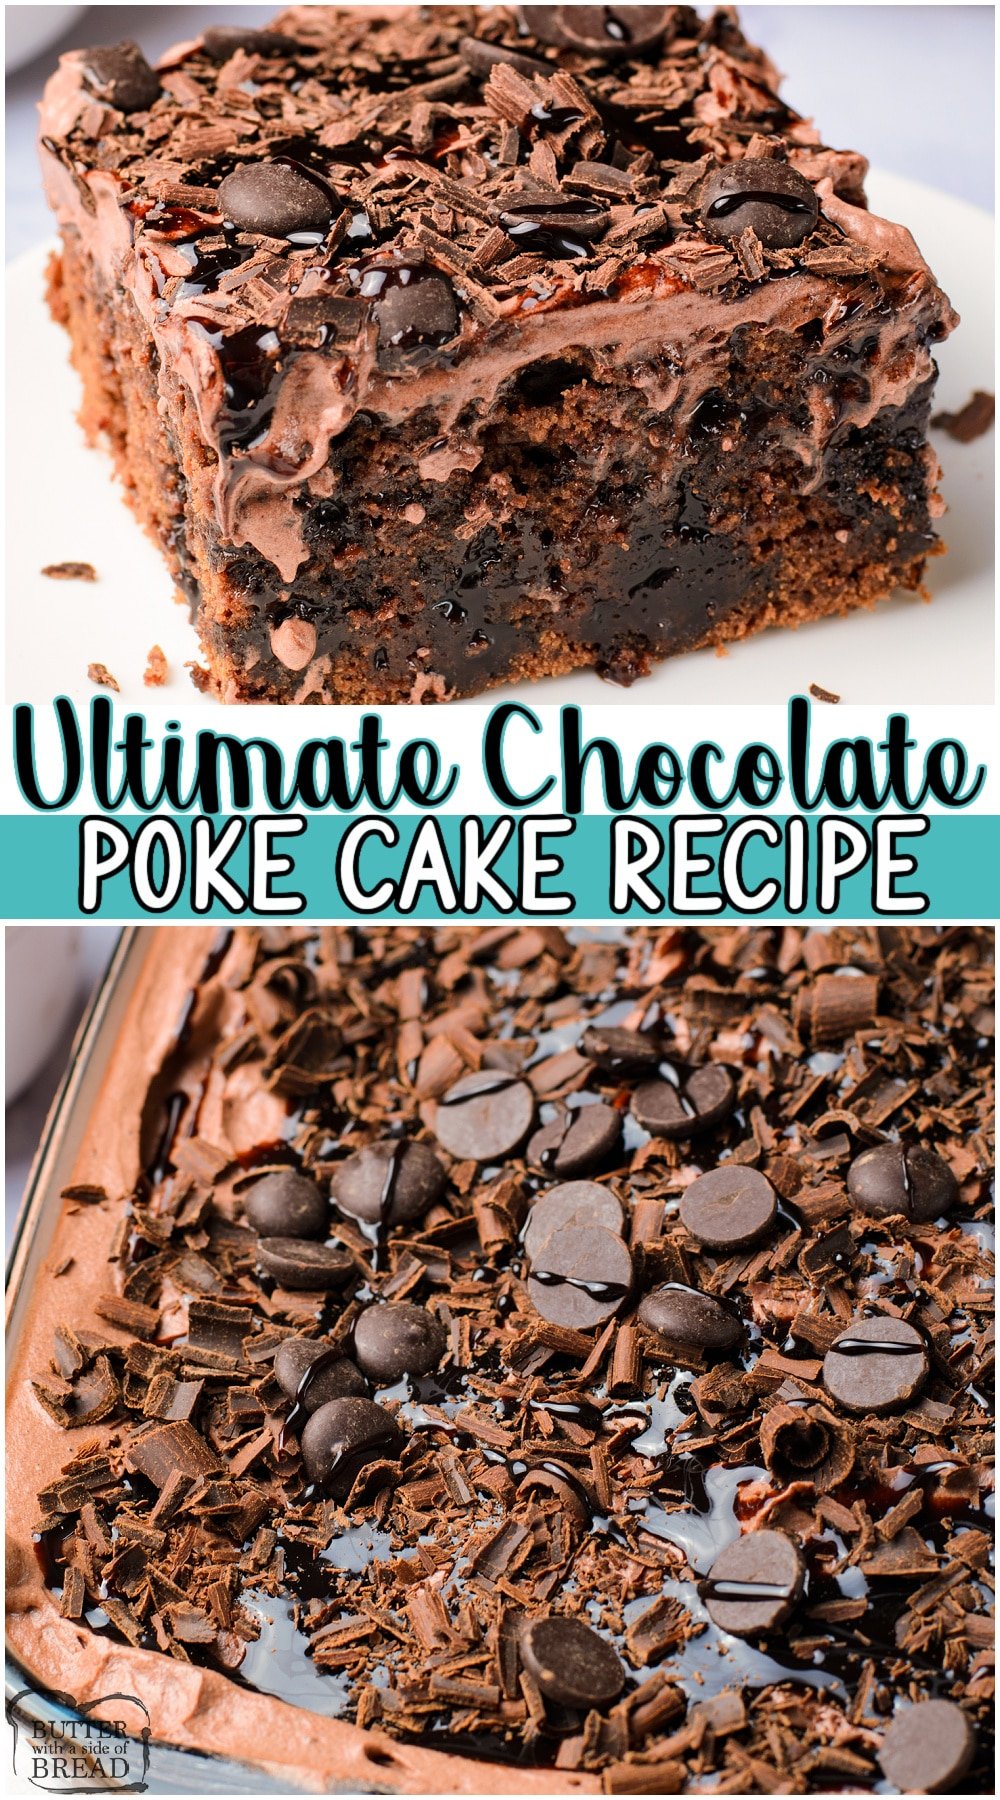 Ultimate chocolate poke cake starts with a cake mix & is a chocolate lover's dream! Moist chocolate cake poked & drizzled with syrup & chocolate chips with a lovely chocolate whipped cream topping. #chocolate #cake #pokecake #dessert #baking #easyrecipe from BUTTER WITH A SIDE OF BREAD